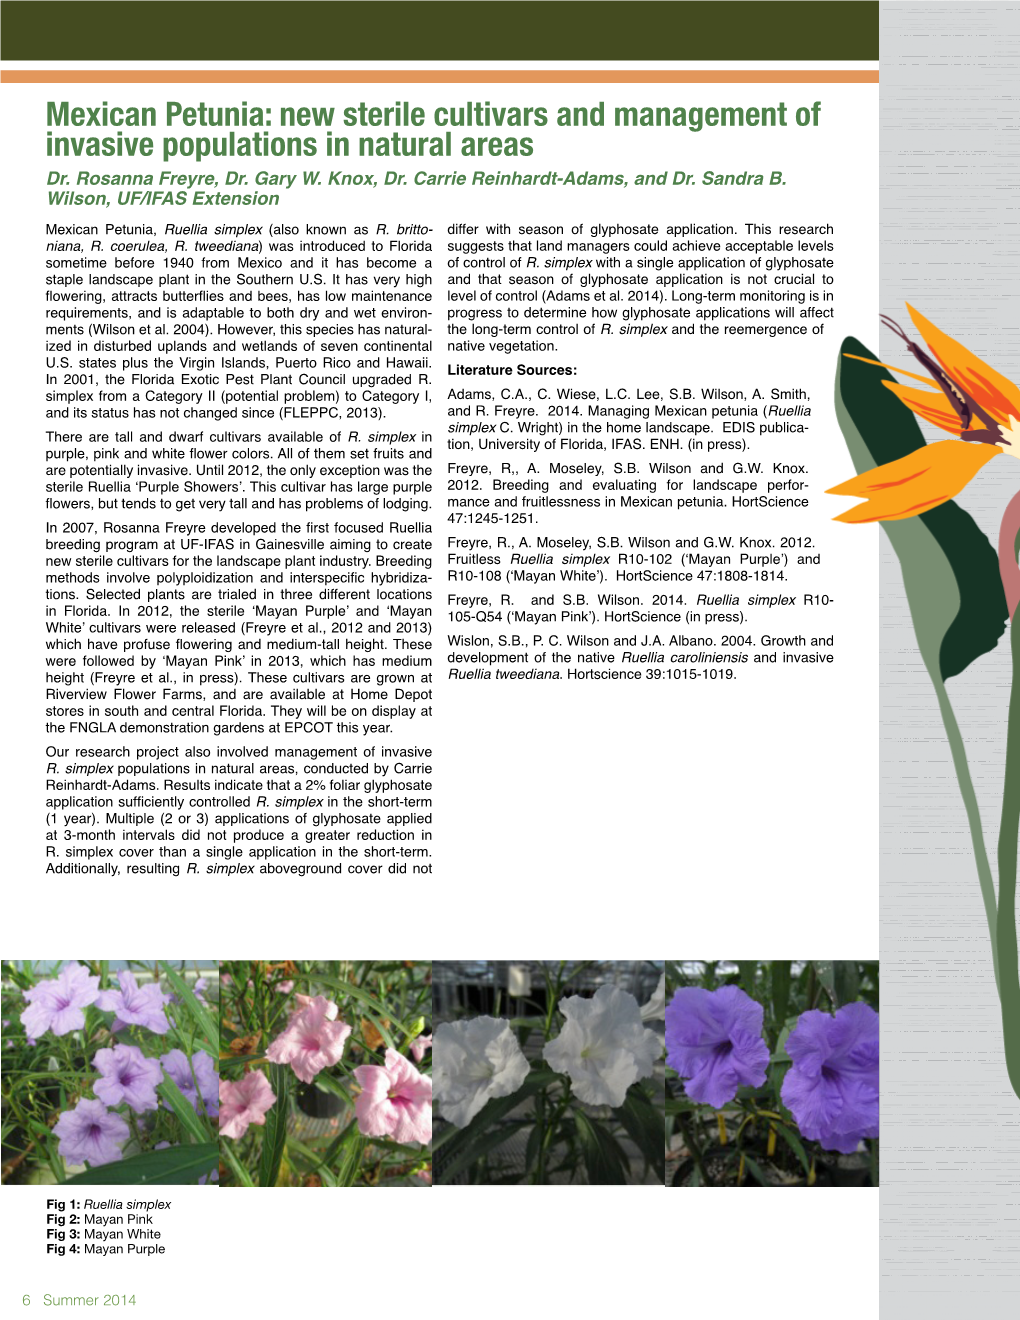 Mexican Petunia: New Sterile Cultivars and Management of Invasive Populations in Natural Areas Dr